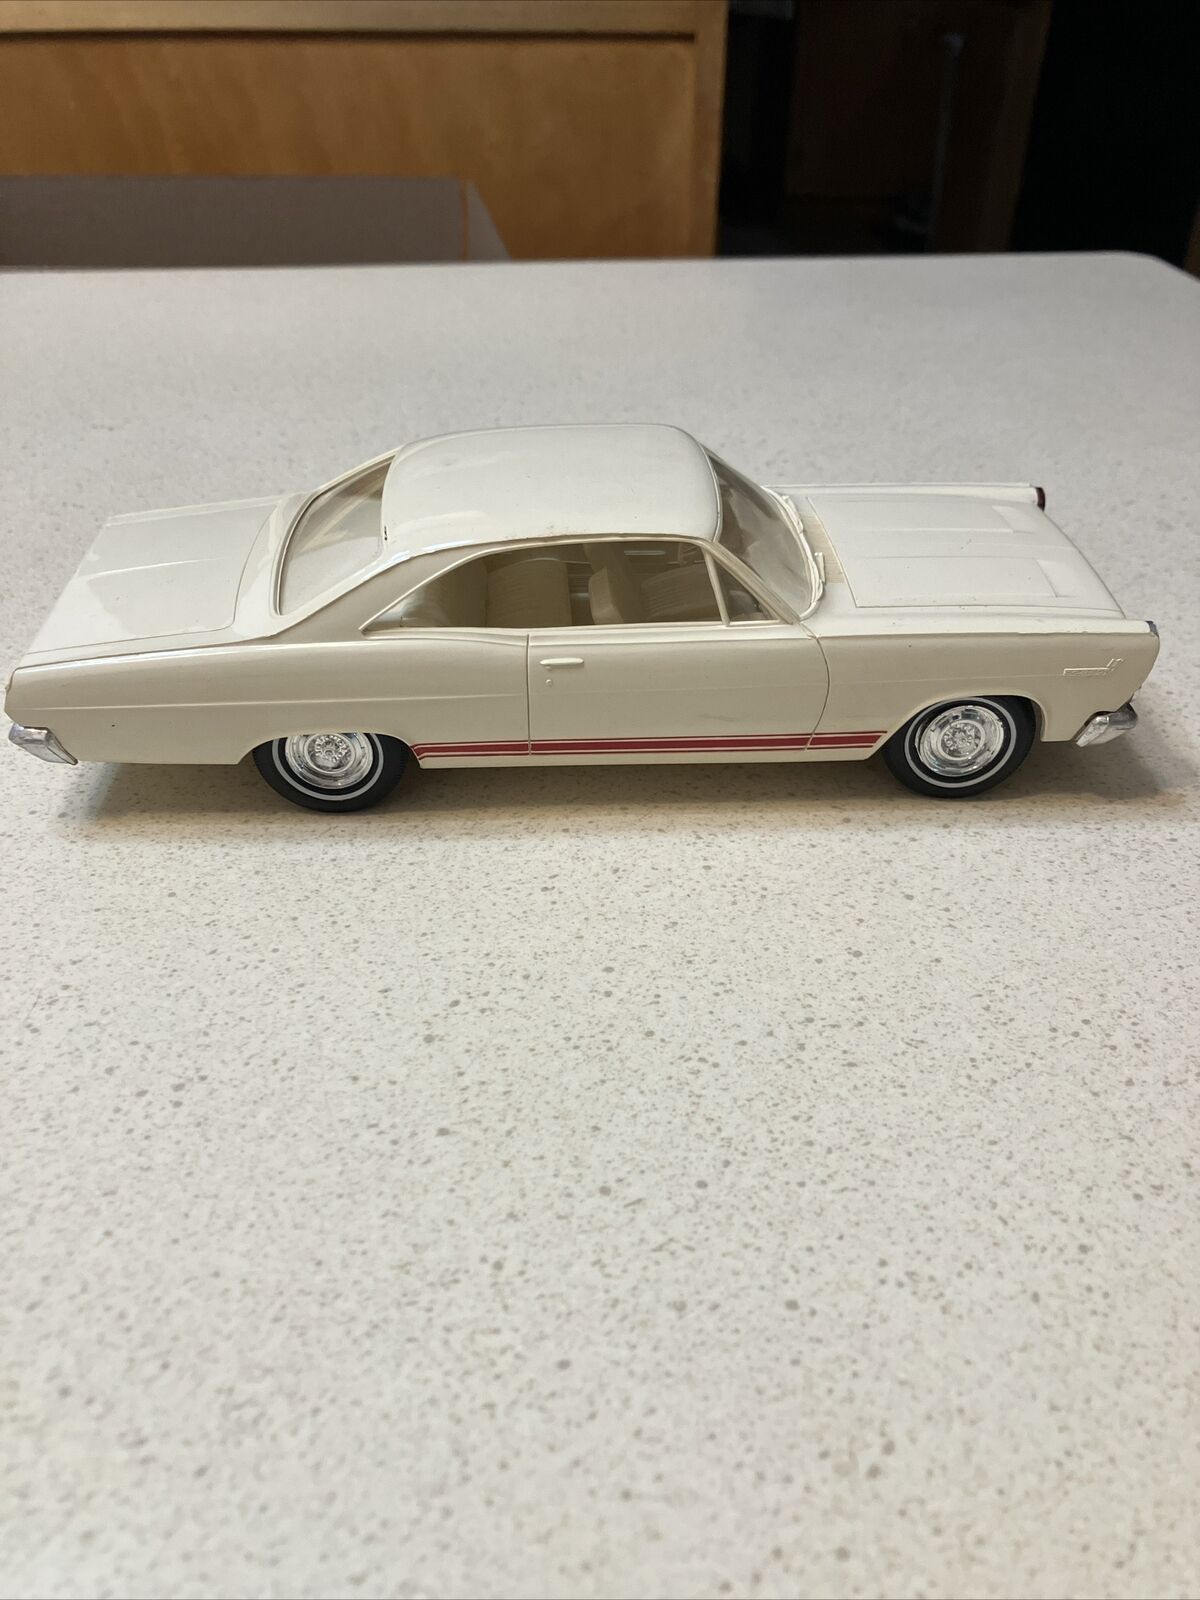 1966 Mercury Comet Cyclone White With White Interior Red Stripes Promo Car Nice